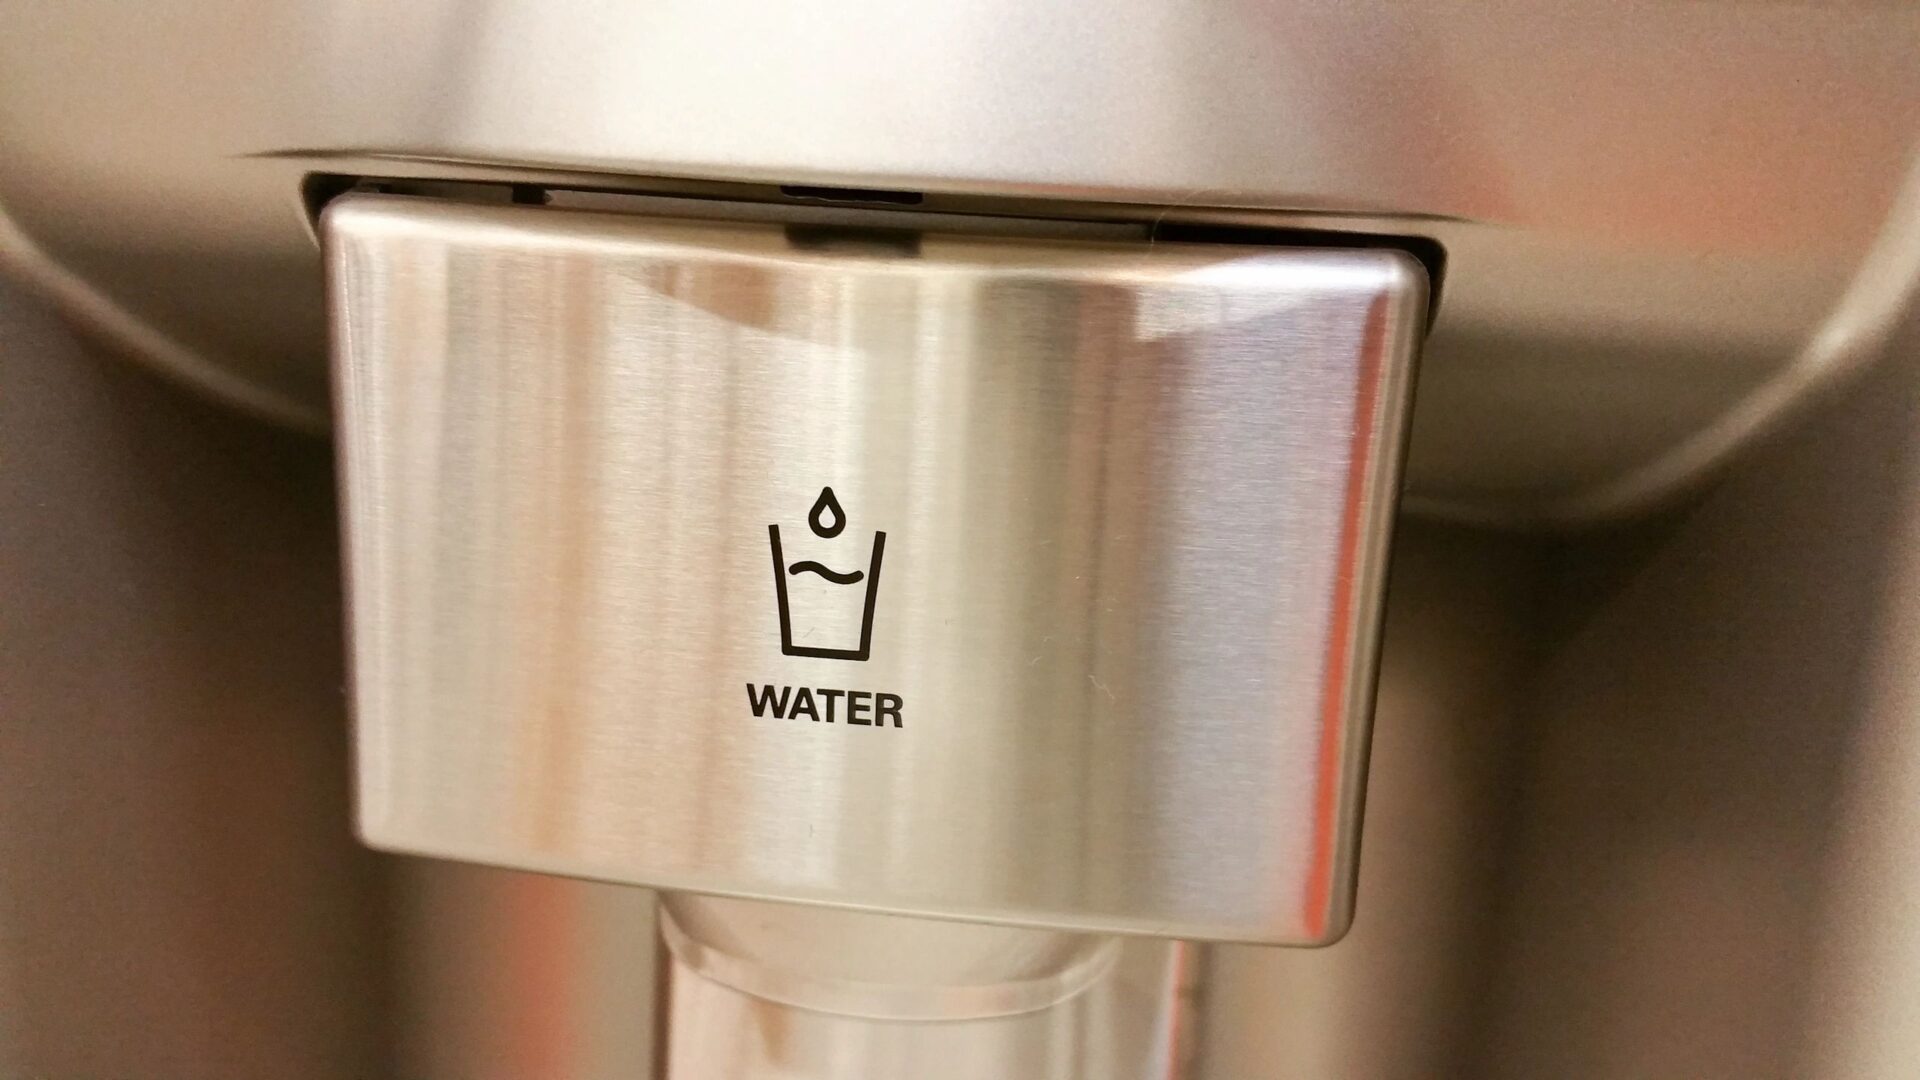 A close up of the water dispenser on a stainless steel wall.